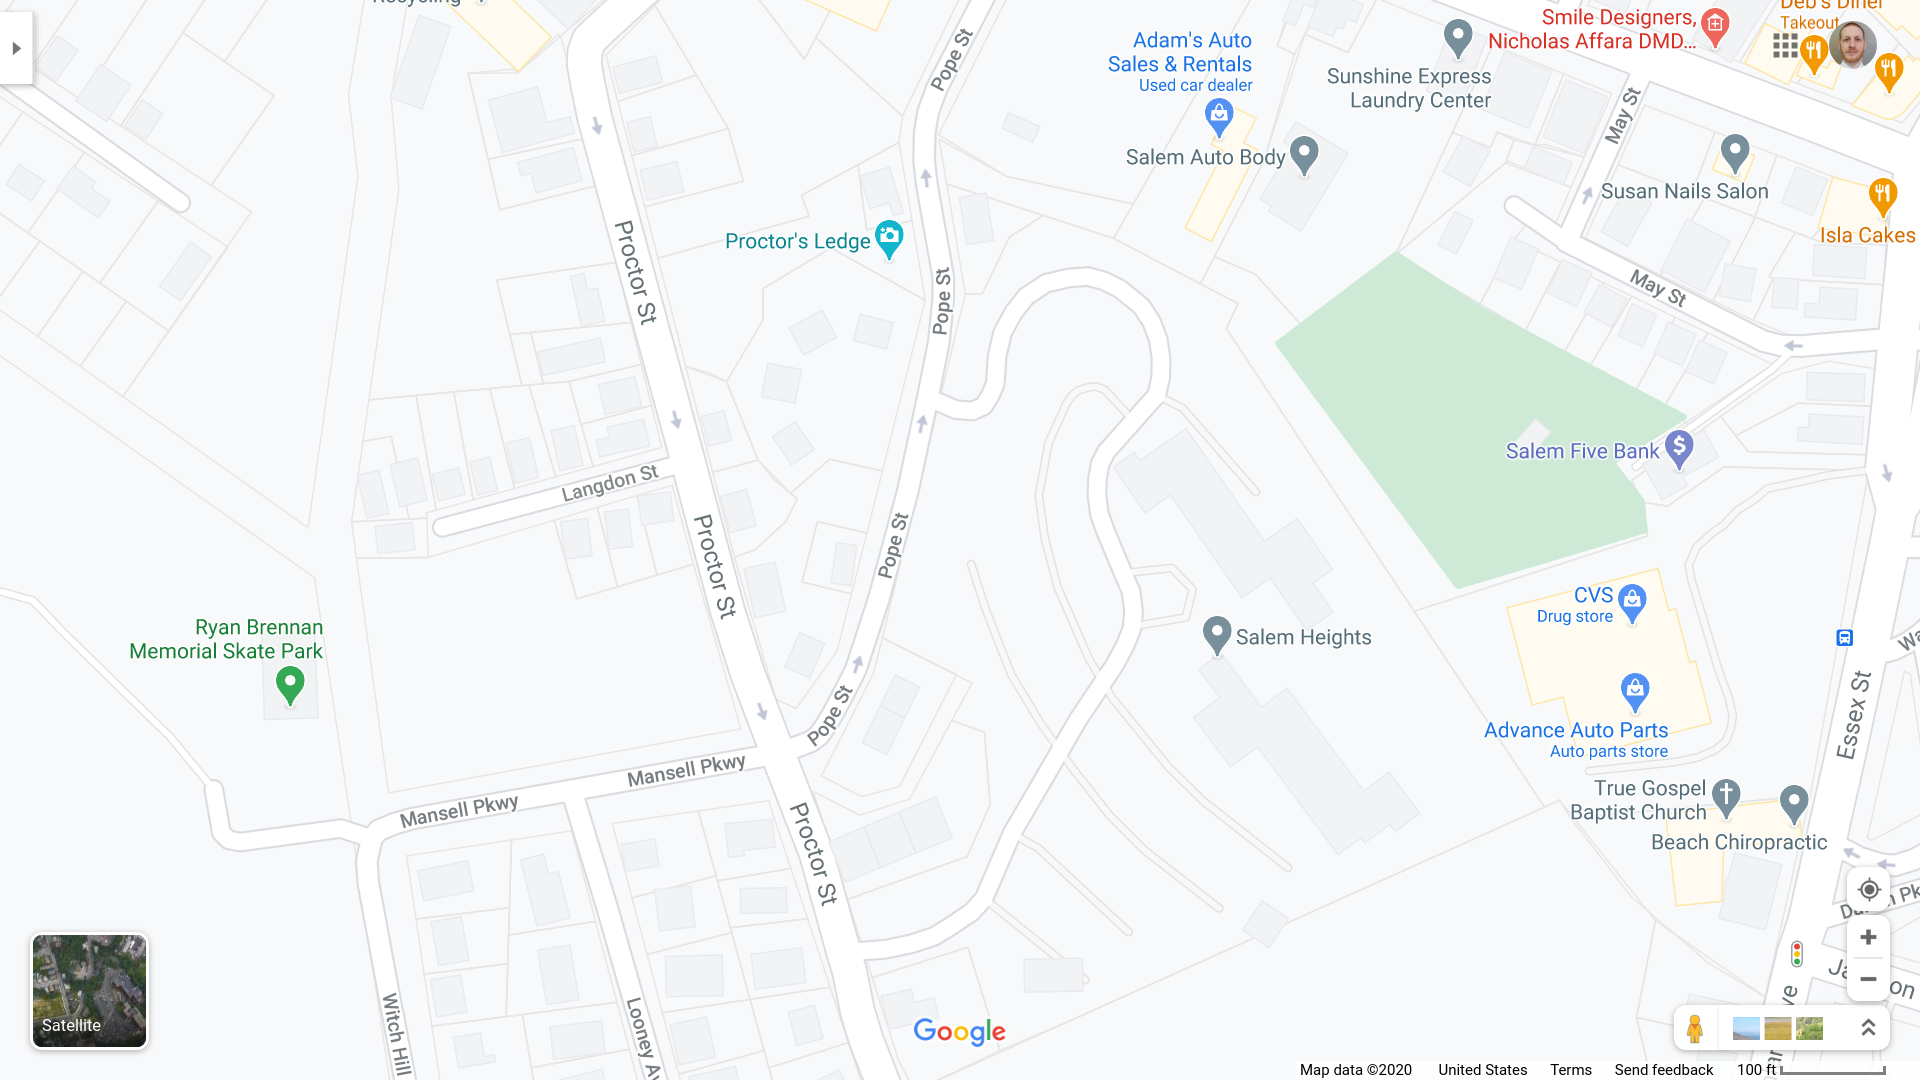 A google map showing a zoomed-in view of the Salem Heights complex.